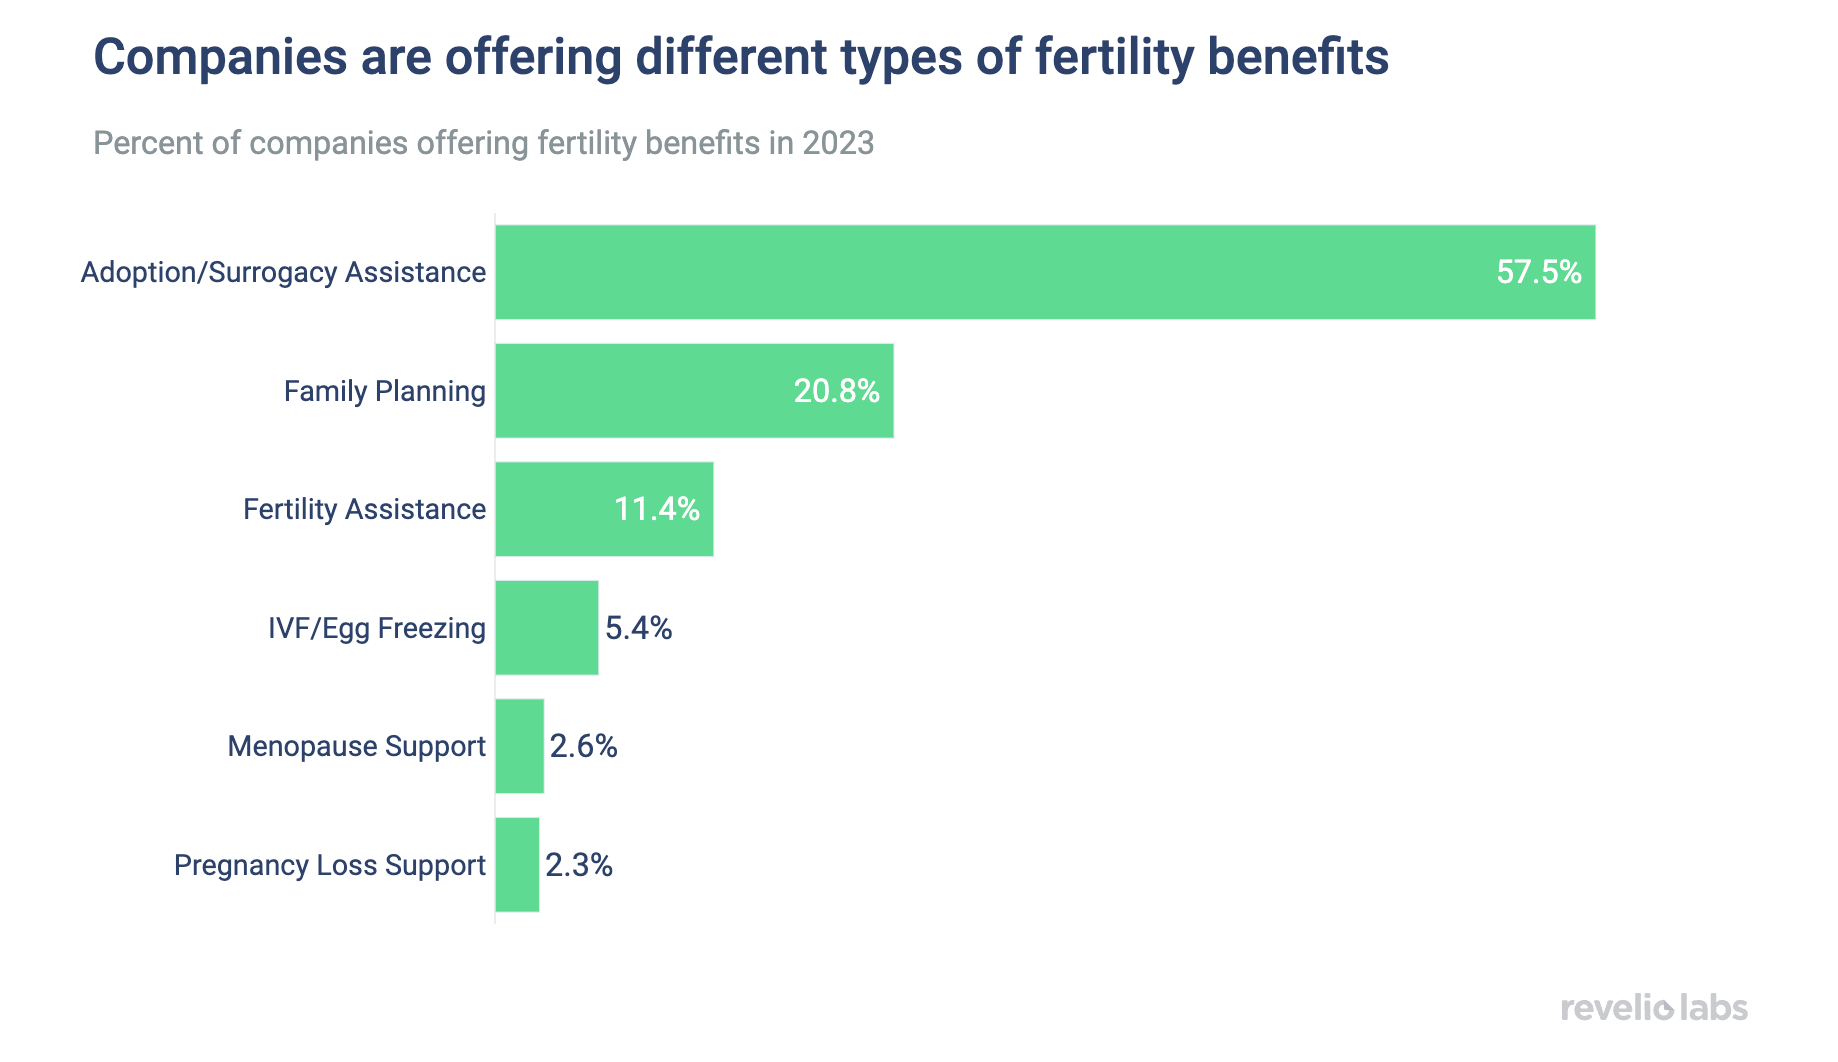 Companies are offering different types of fertility benefits